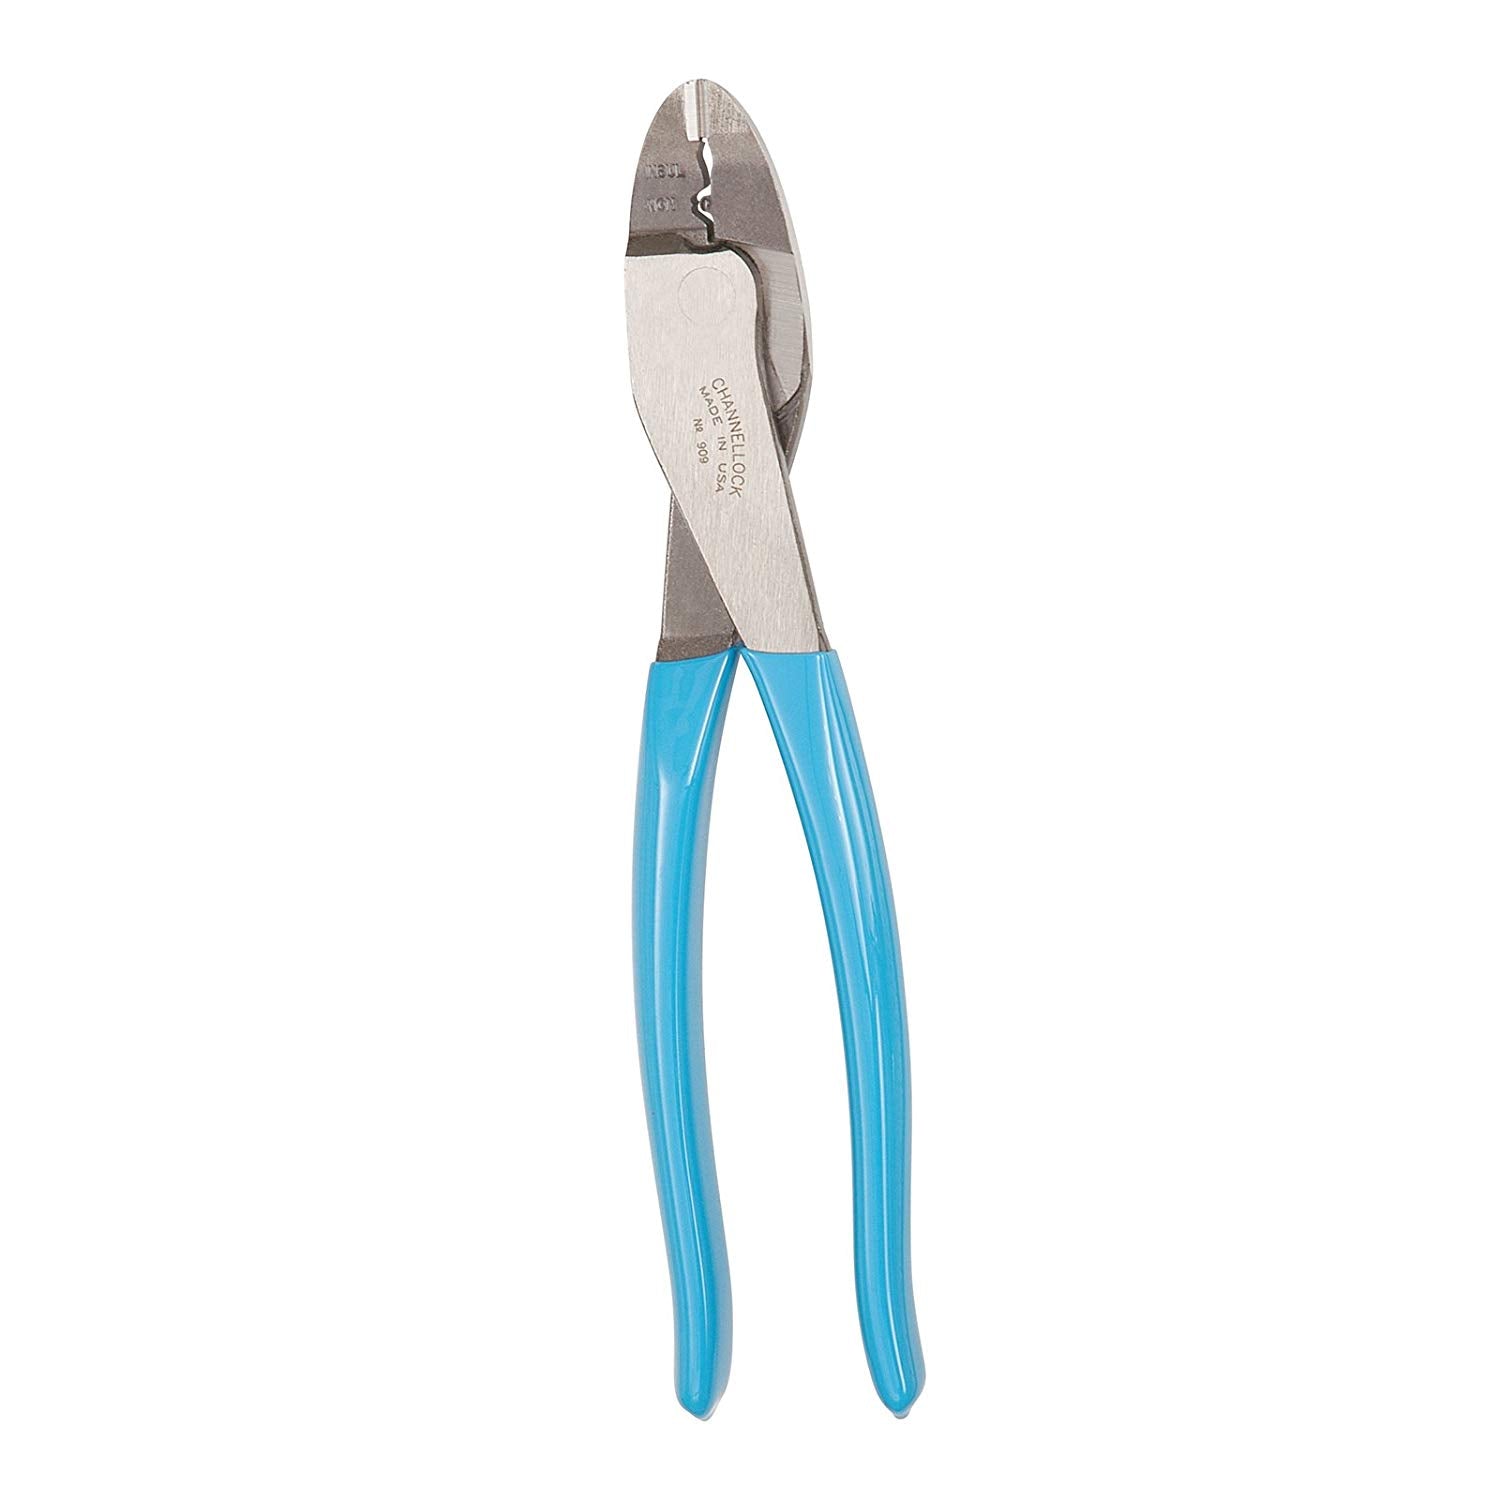 ChannelLock 909 - 9.5" Crimping Plier - wise-line-tools